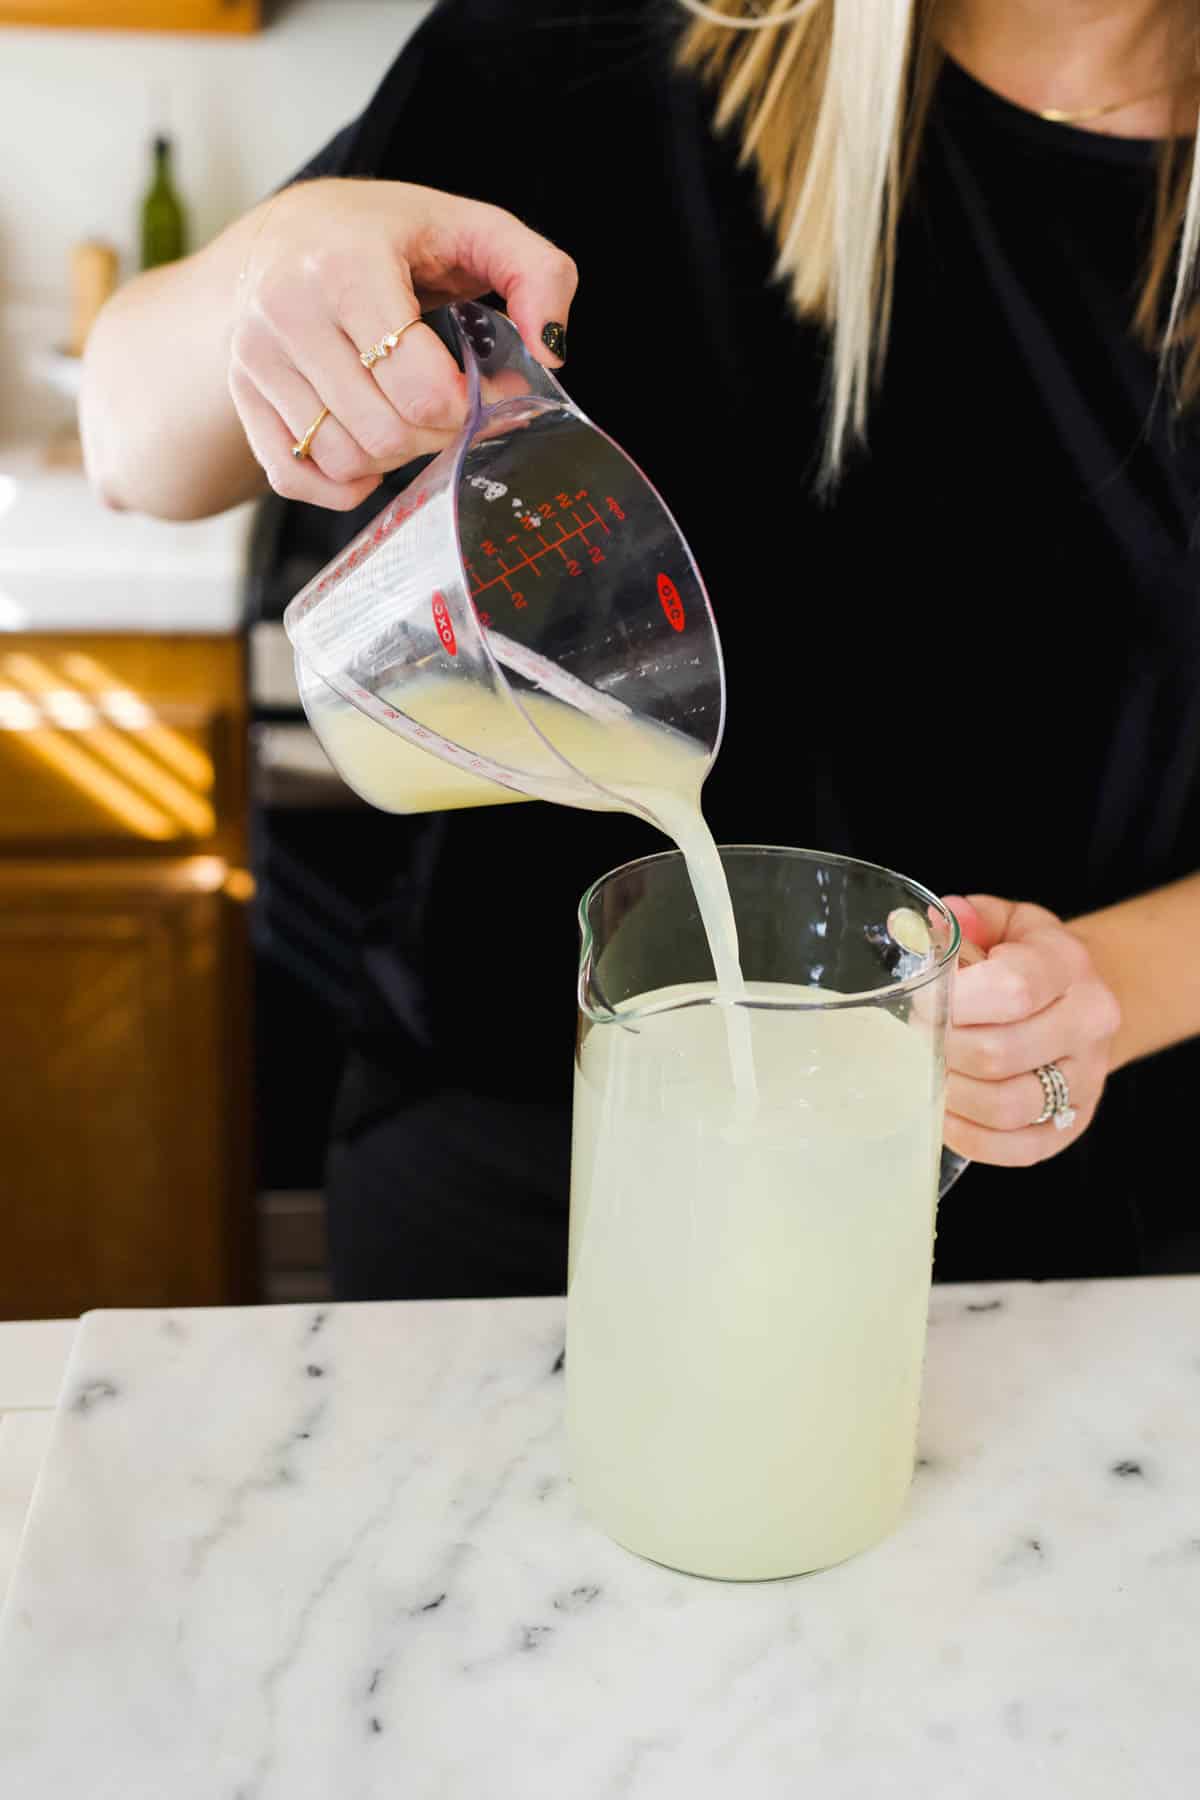 Woman adding fresh lime juice from a measuring cup into a pitcher.